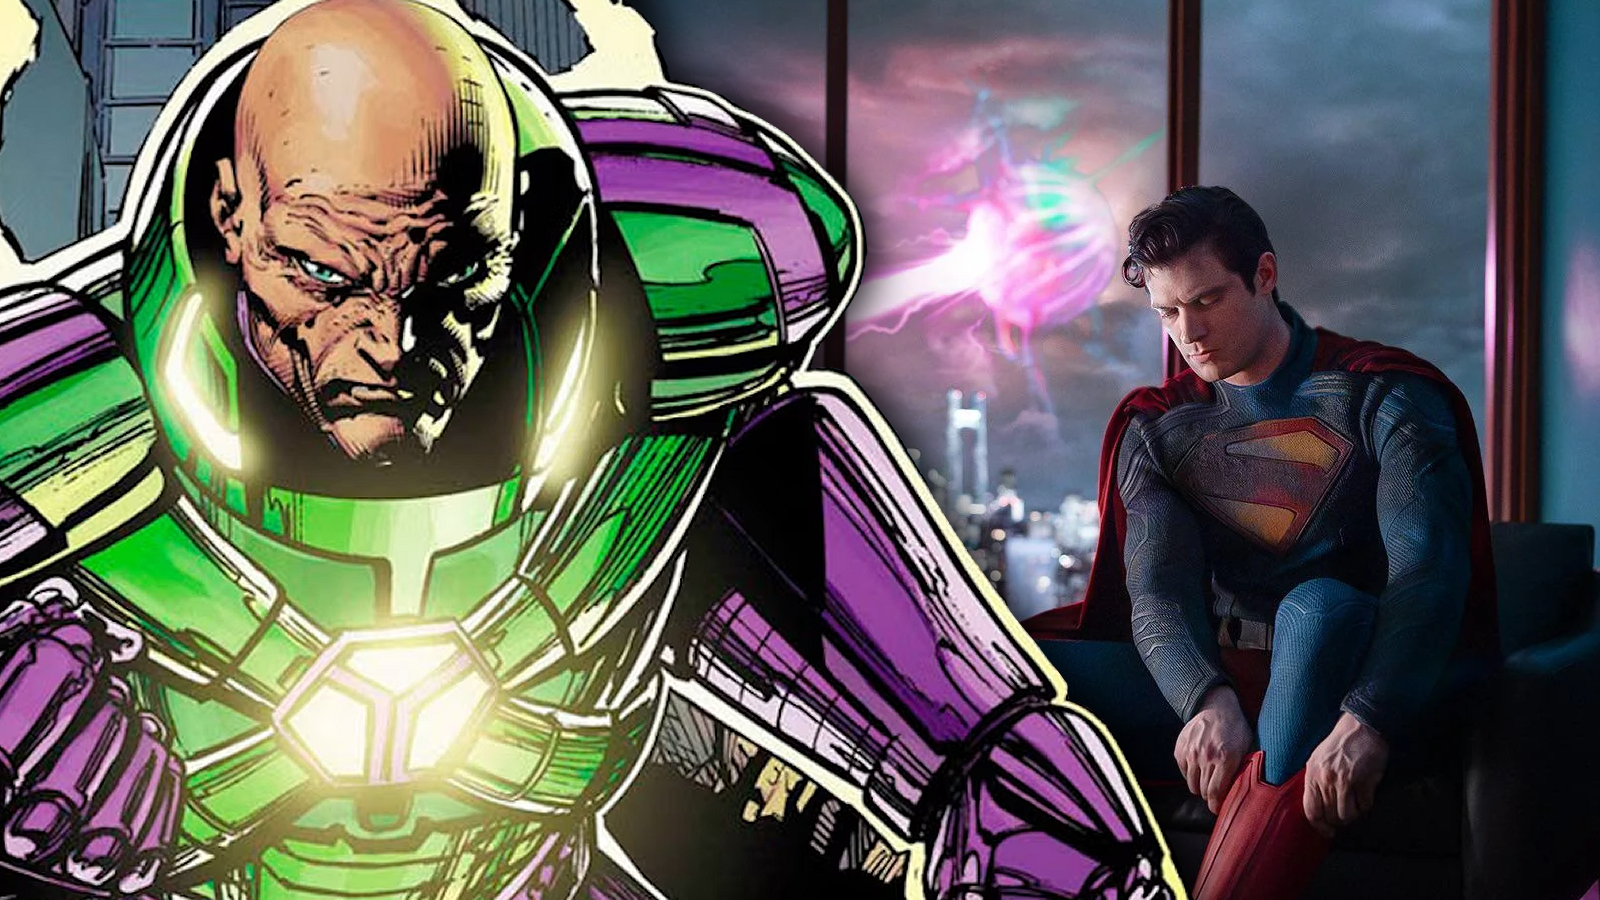 Comic book artwork of Lex Luthor's power suit combined with David Corenswet's Superman reveal image